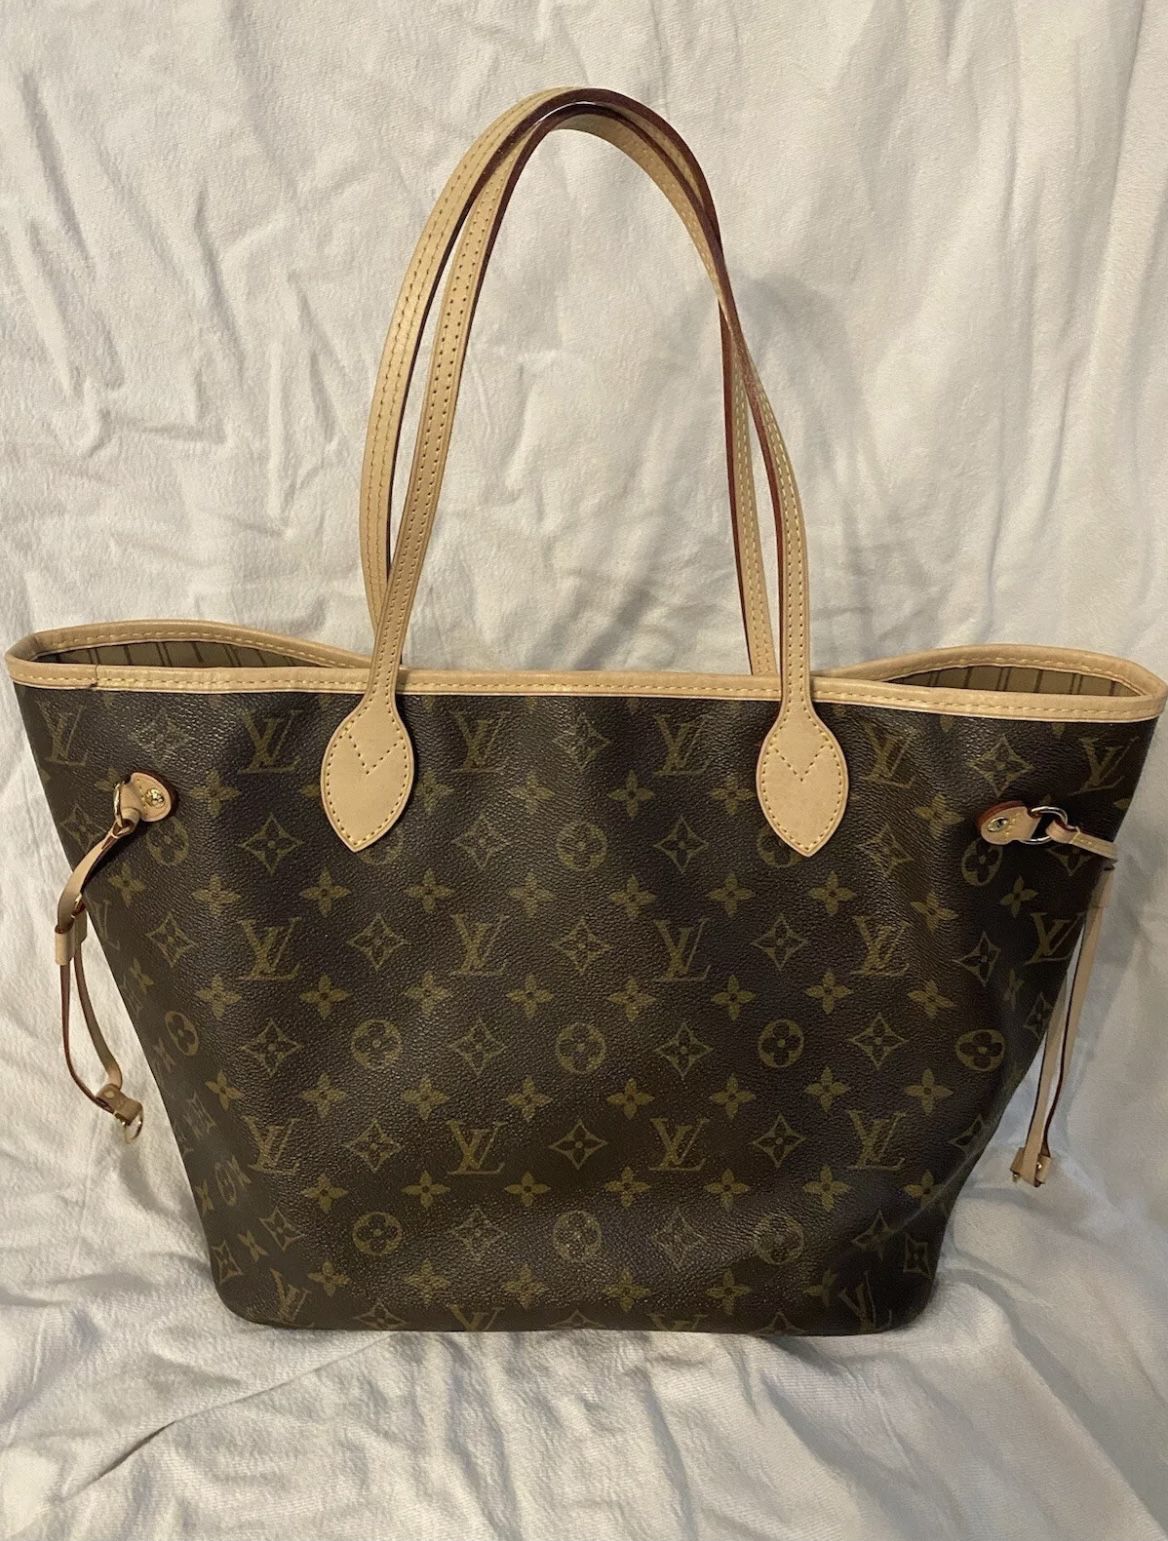 Used Louis Vuitton Neverfull Bag w/receipt